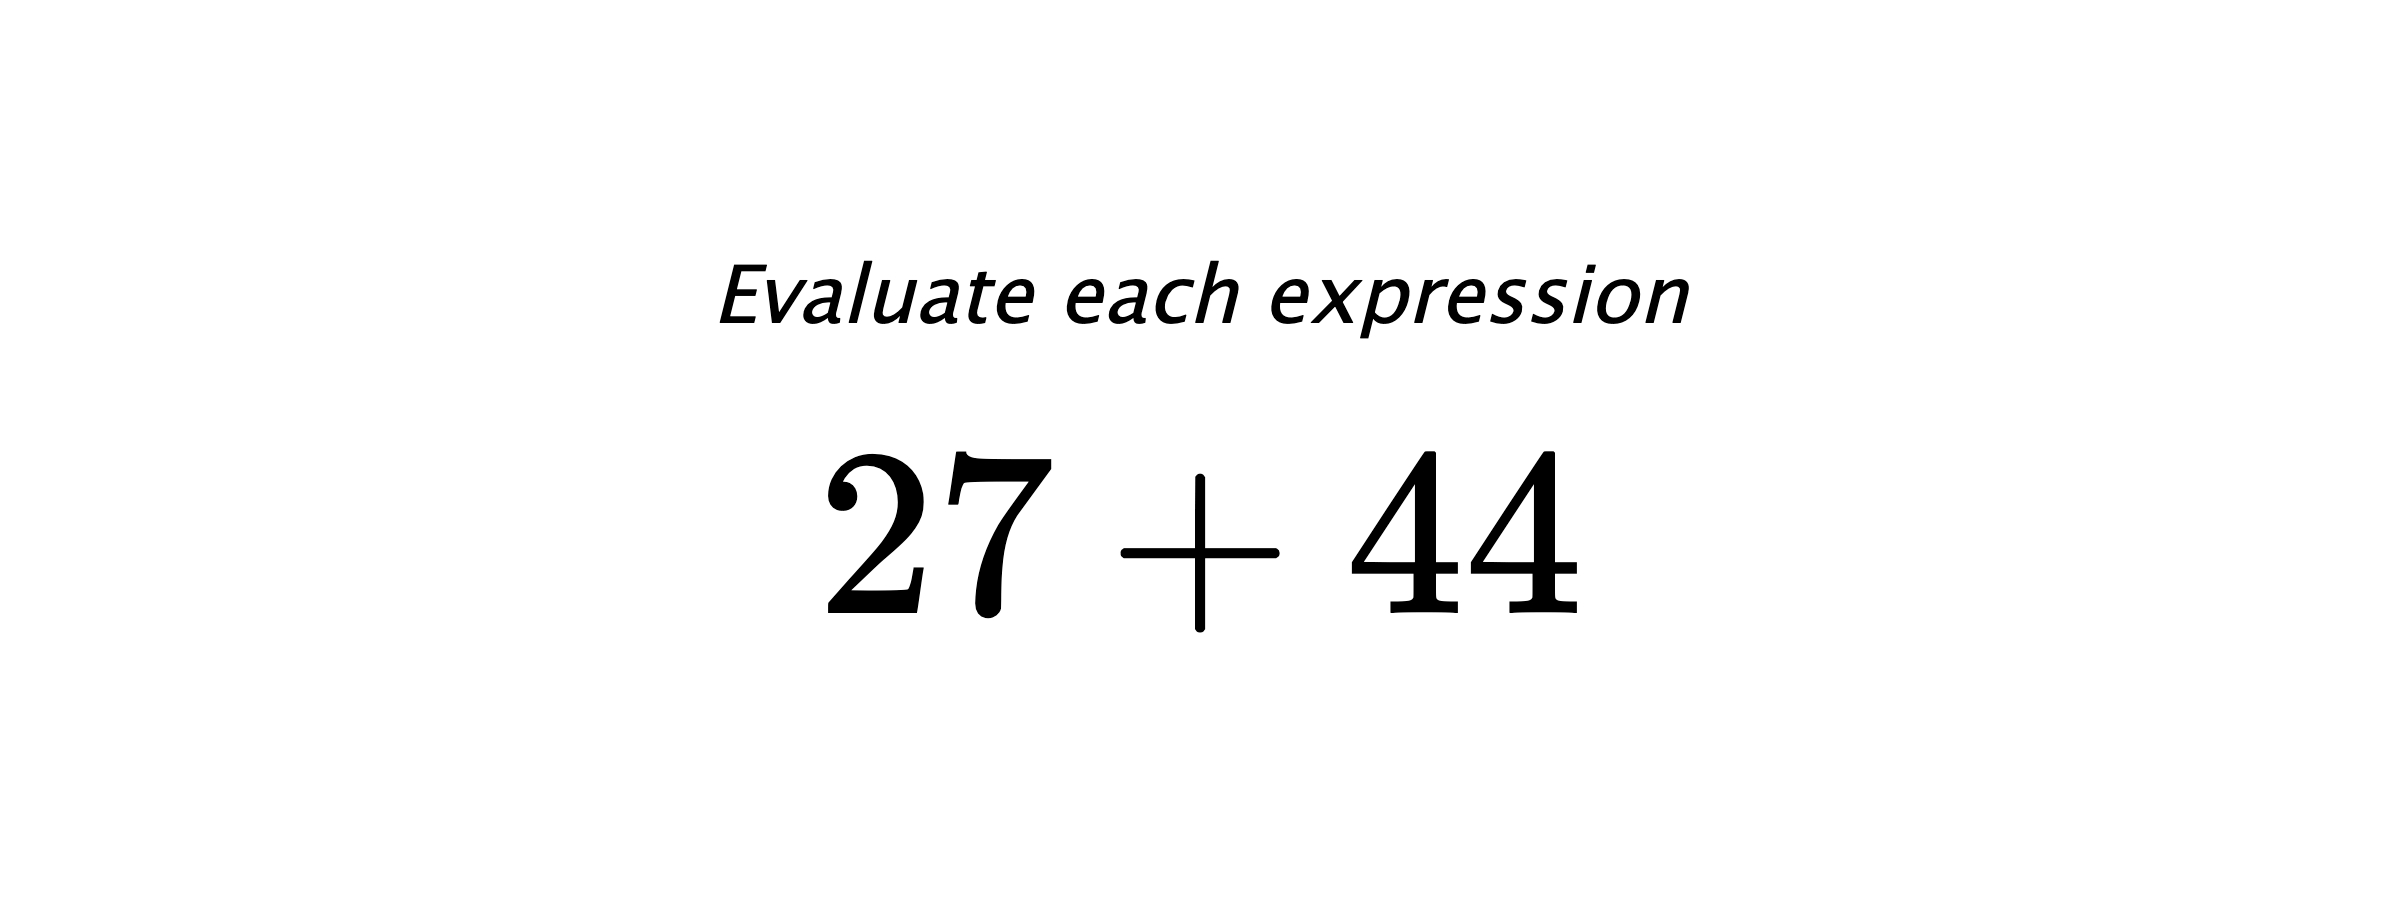 Evaluate each expression $ 27+44 $